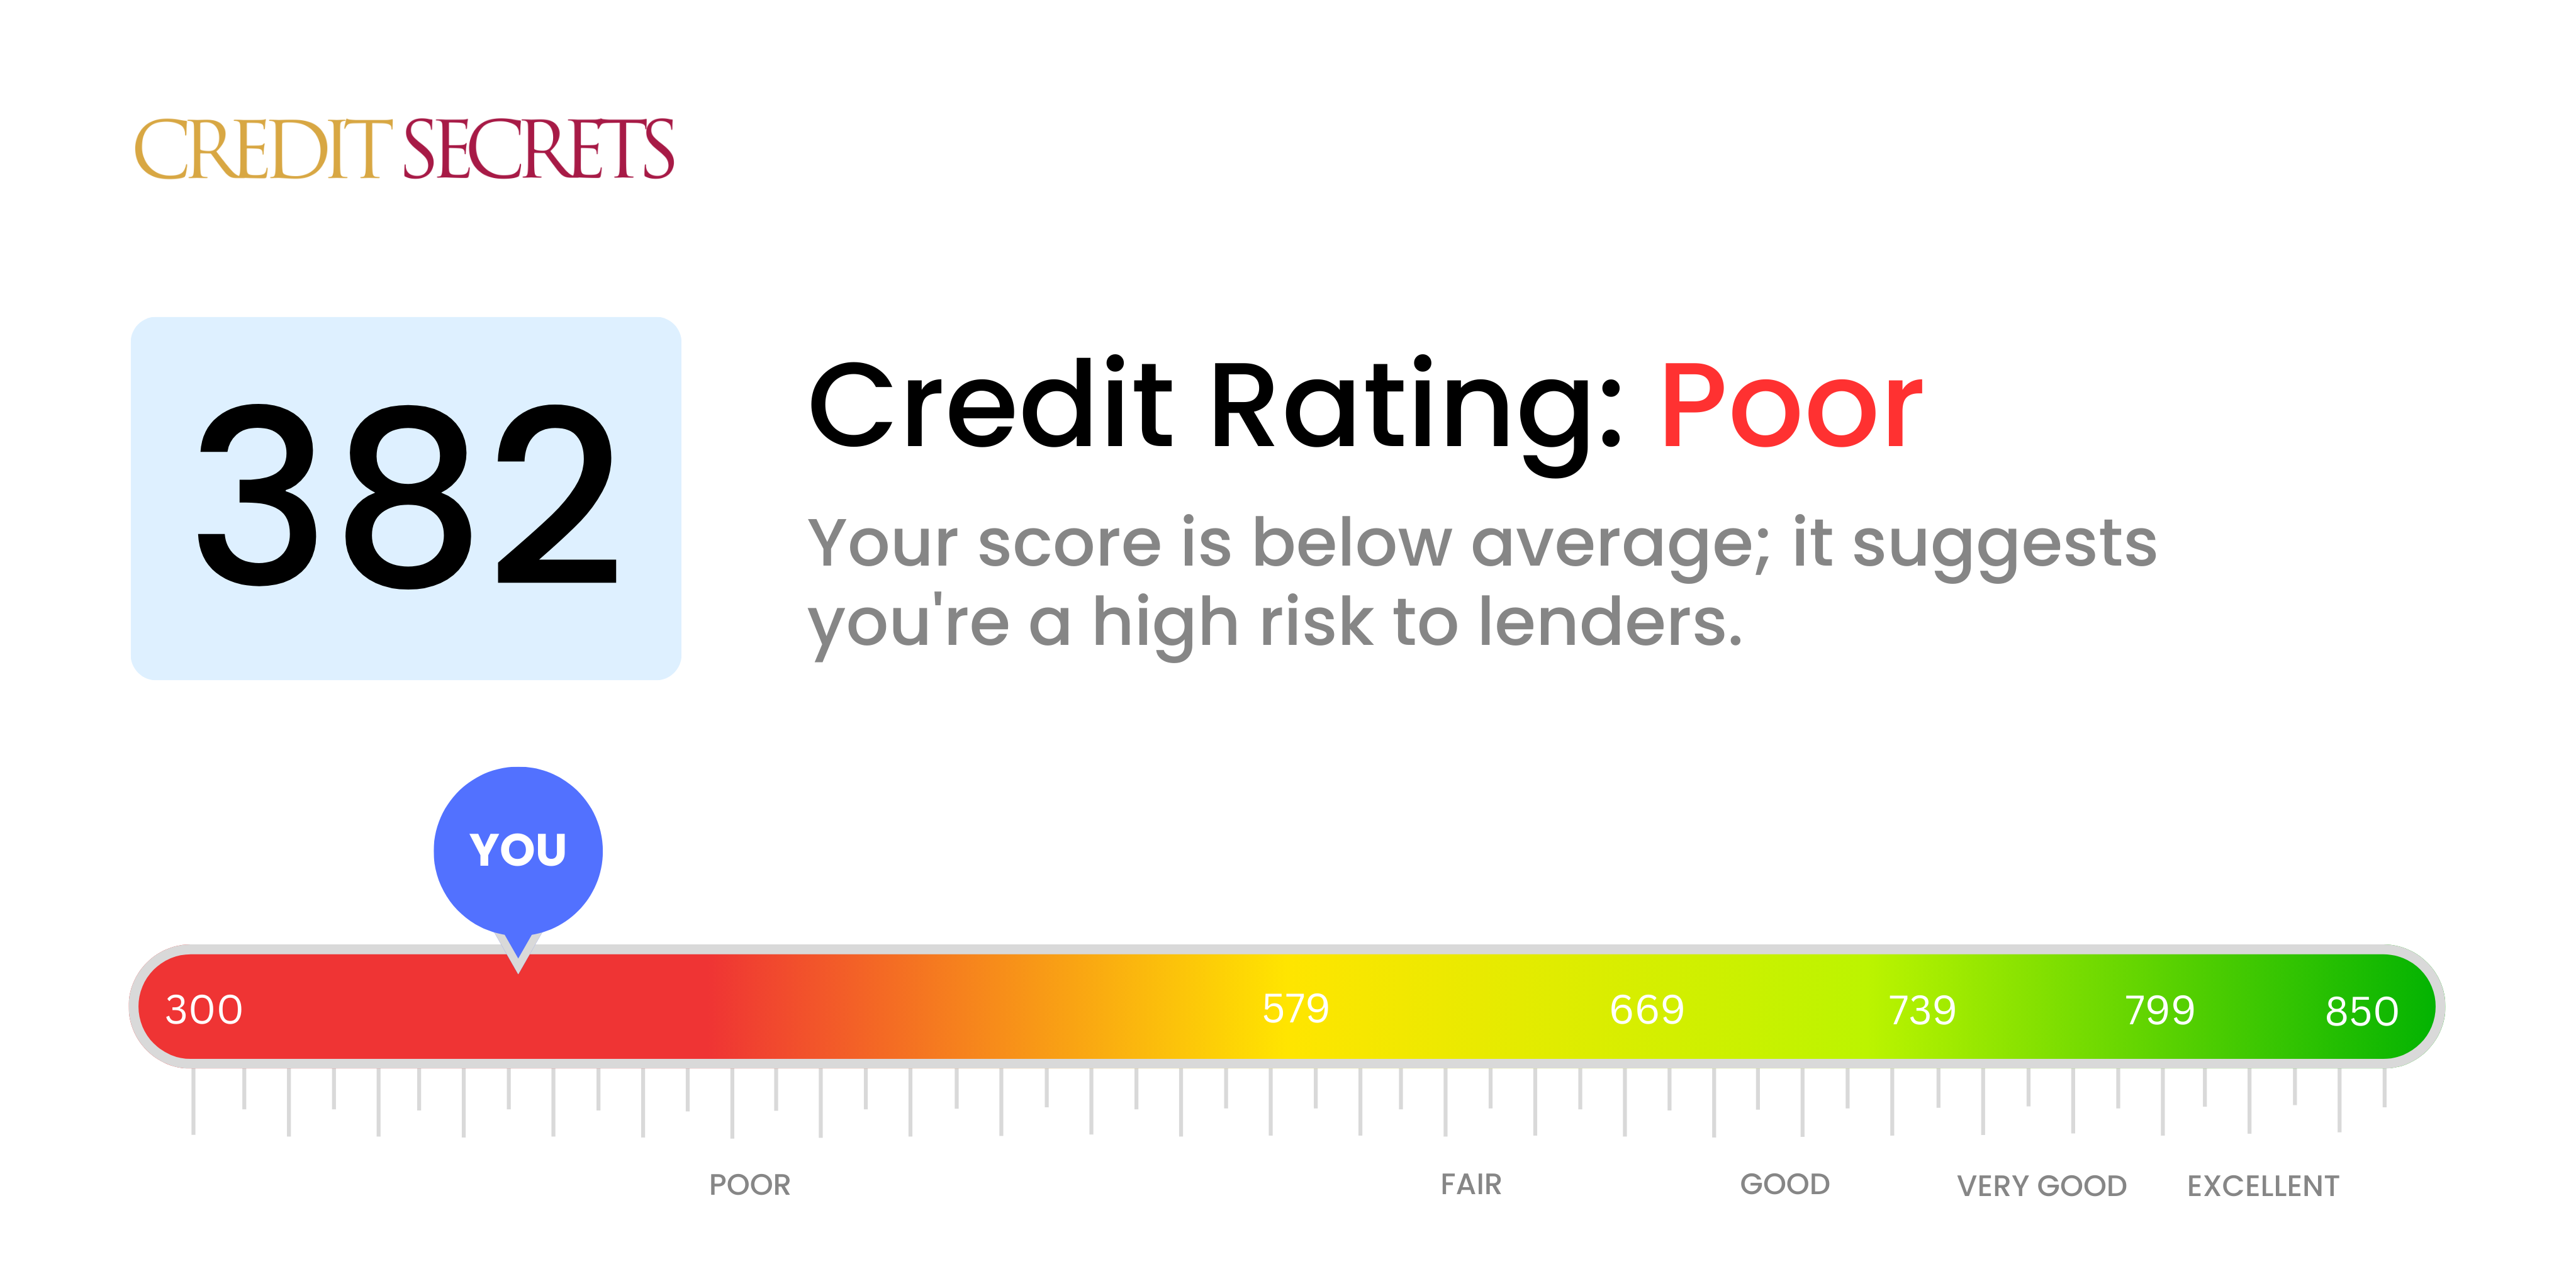 Is 382 a good credit score?